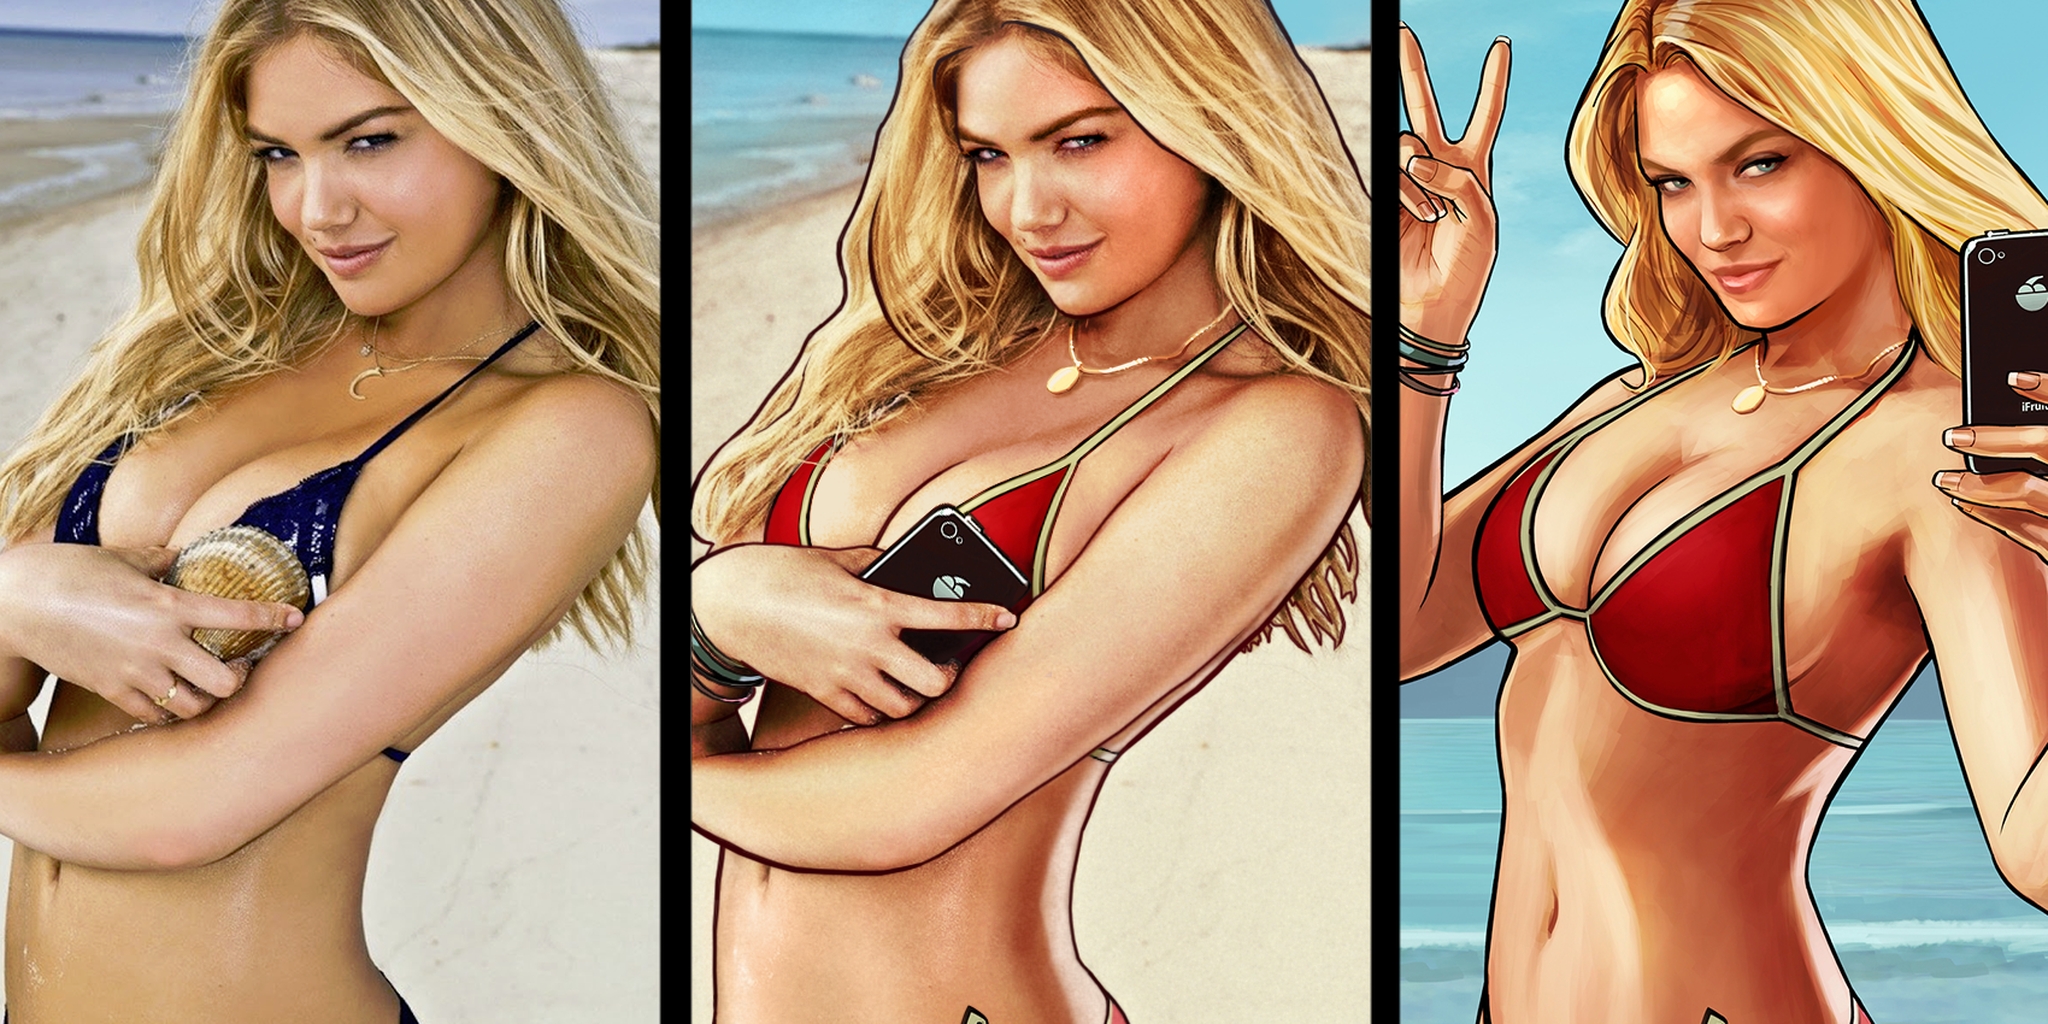 Thats not Kate Upton in the Grand Theft Auto V ads—its this model picture